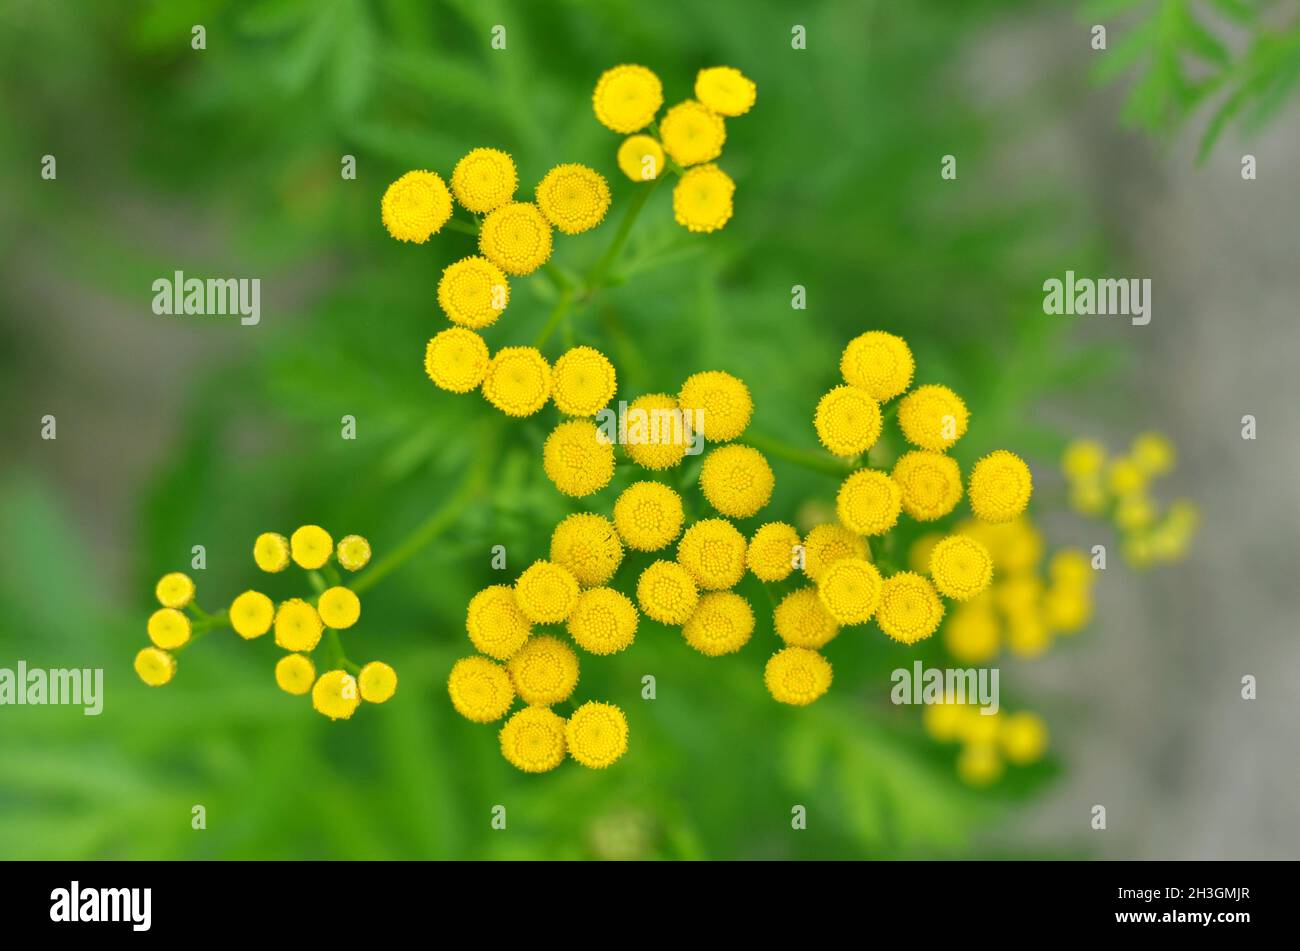 Tansy or Tanacetum vulgare is a perennial herb used in folk medicine. Yellow tansy flowers over green grass in the summer outdoors, top view. Flora of Stock Photo